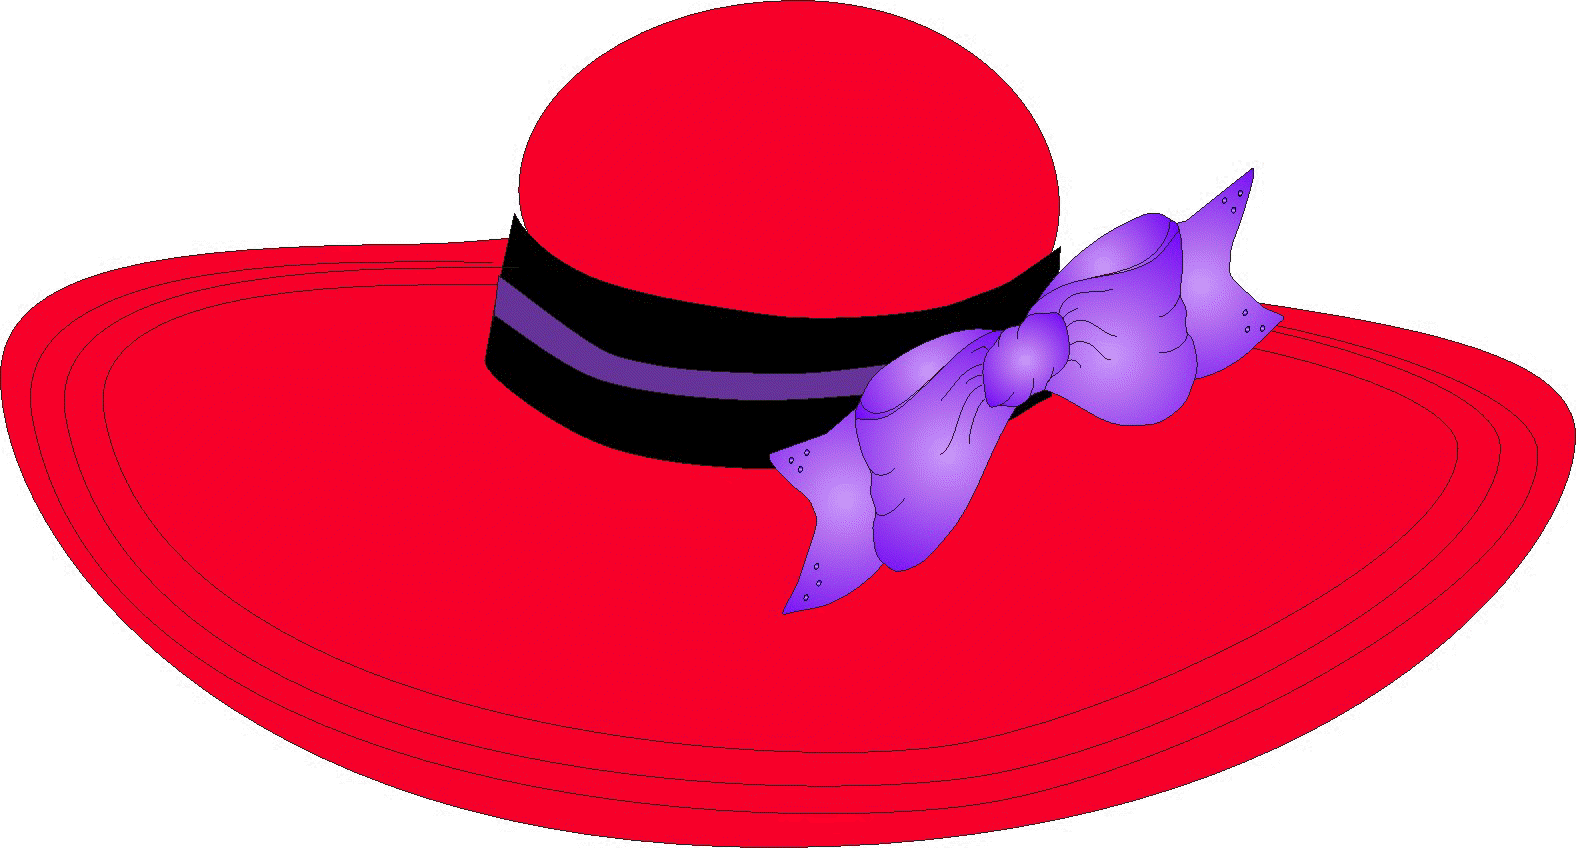 Red hat day mainstreet. Hats clipart camping